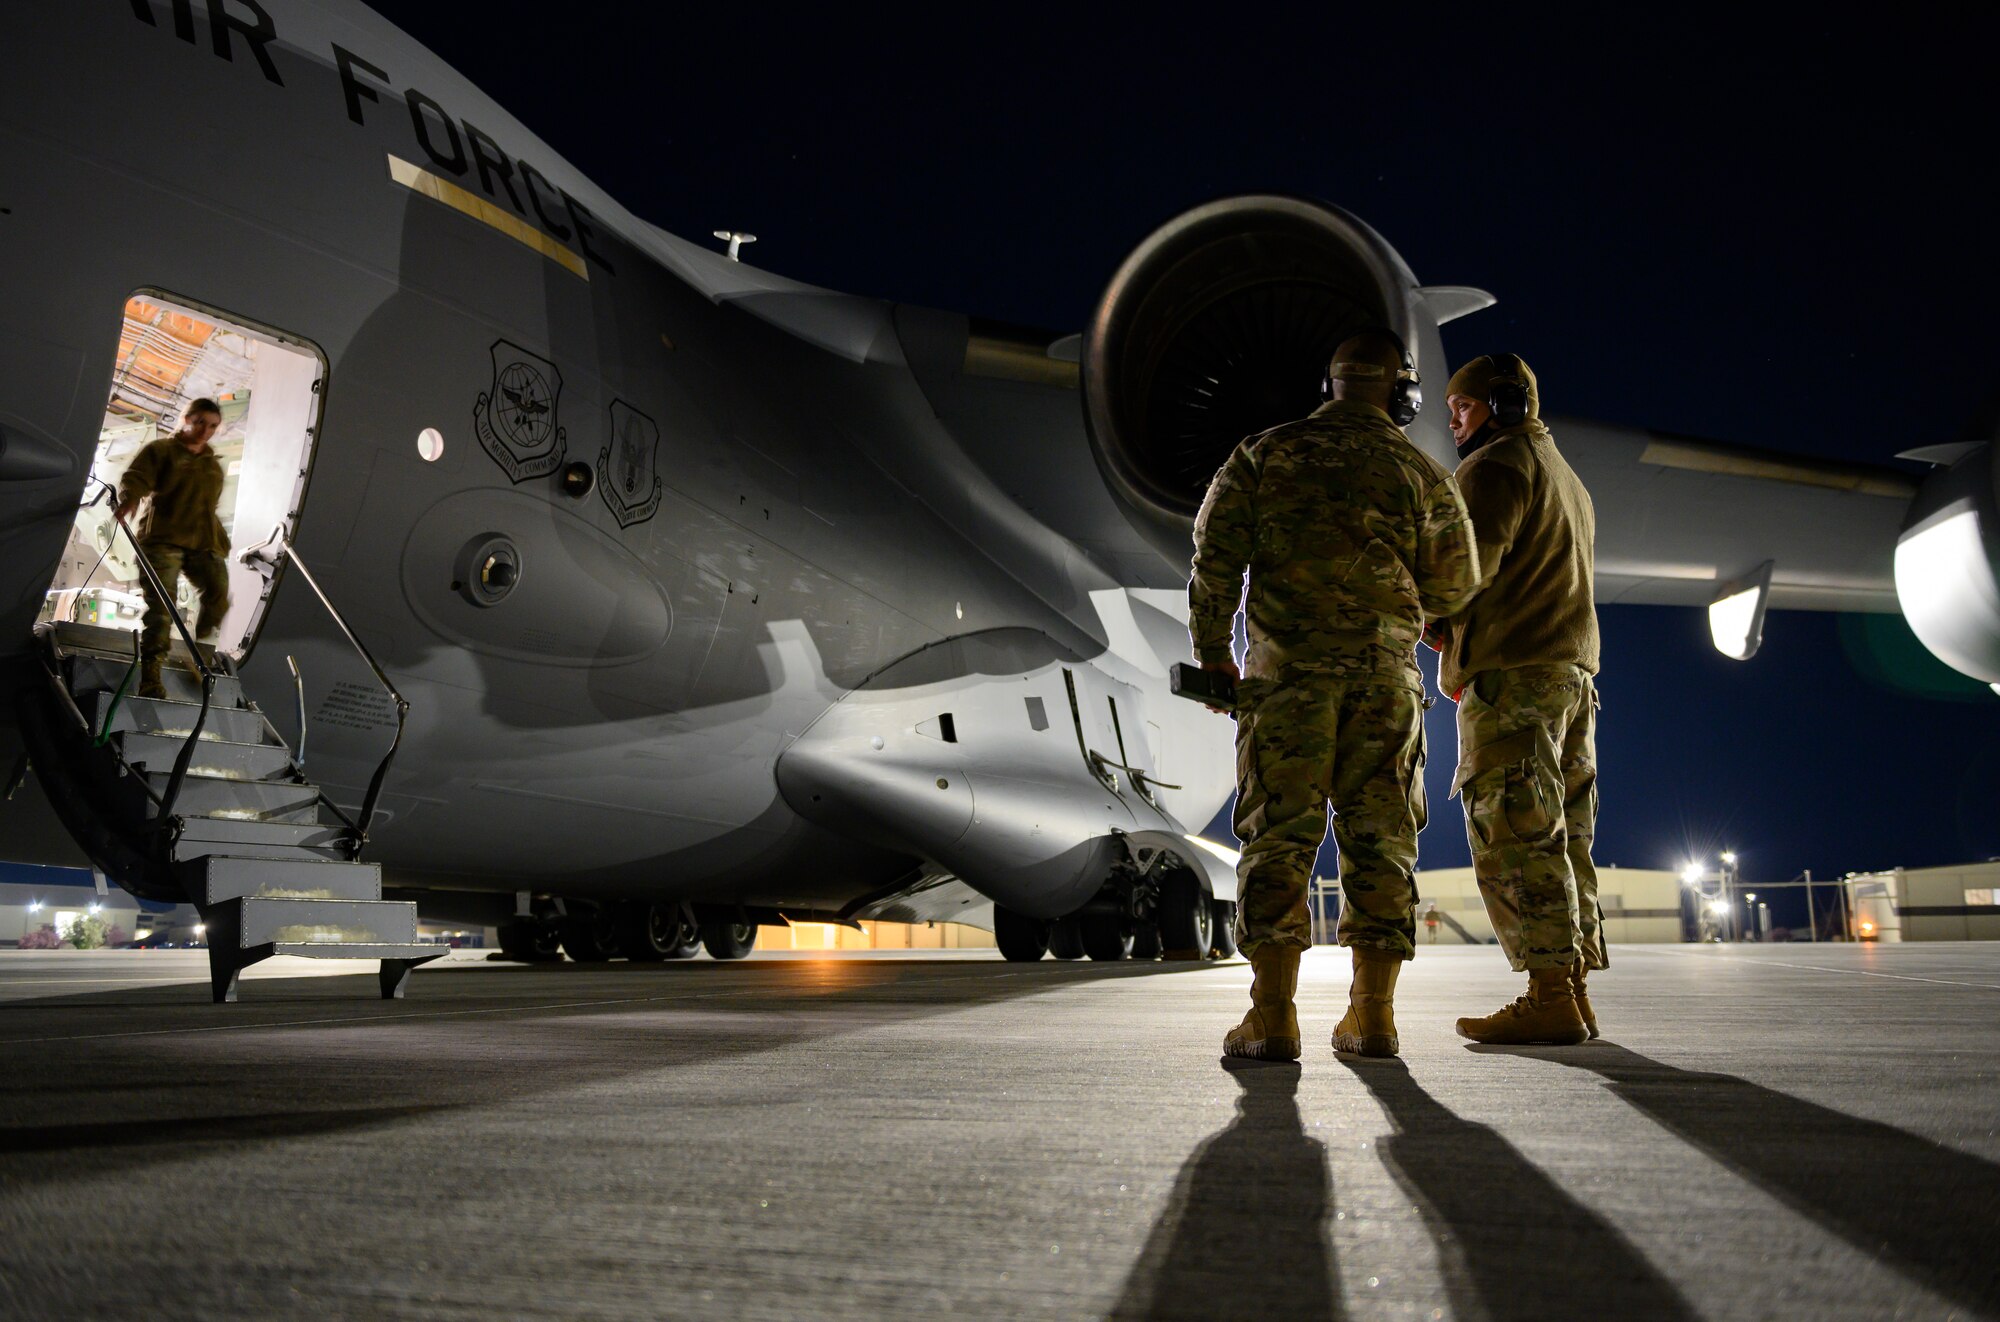 Airmen from the 821st Contingency Response Squadron go through marshalling and parking procedures for a C-17 Globemaster III from Joint Base Lewis-McChord, Washington, at Mountain Home Air Force Base, Idaho, April 27, 2021. The 821st CRS’ ability to rapidly deploy multi-capable Airmen to where they’re needed most was tested throughout exercise Rainier War. The exercise was a multiple-day gauntlet meant to test various units’ capabilities in employing air combat capabilities during a time of potentially imminent foreign aggression. (U.S. Air Force photo by Staff Sgt. Christian Conrad)